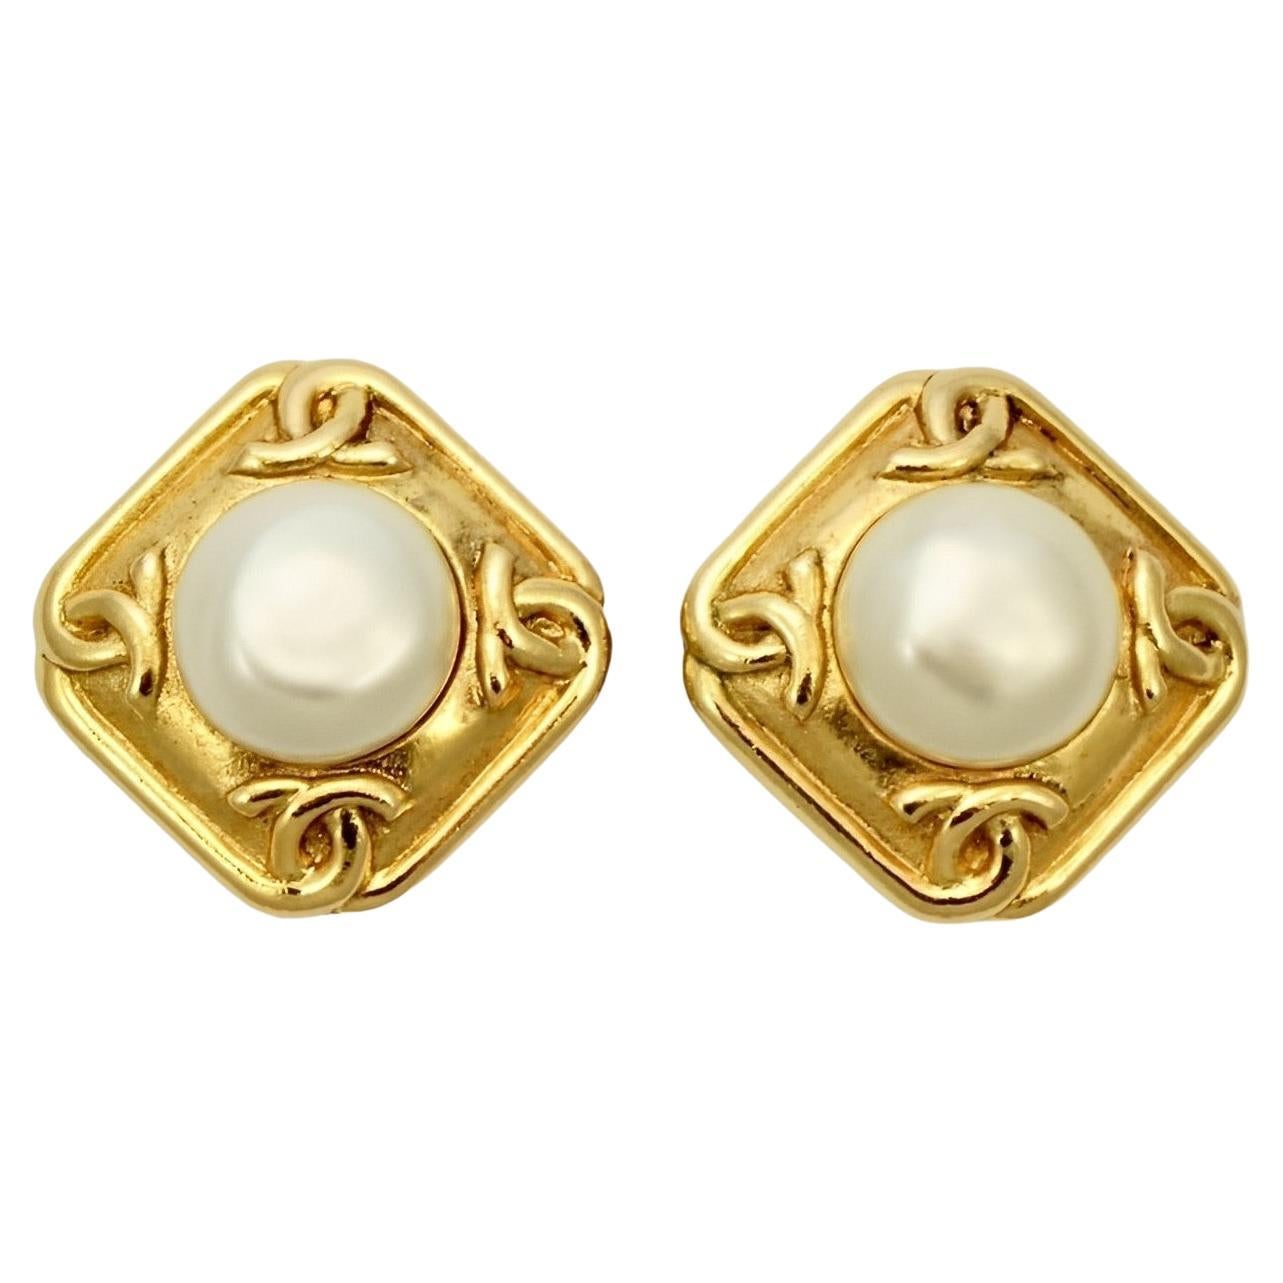 Chanel Gold Plated Logo Faux Pearl Clip On Earrings circa 1980s.